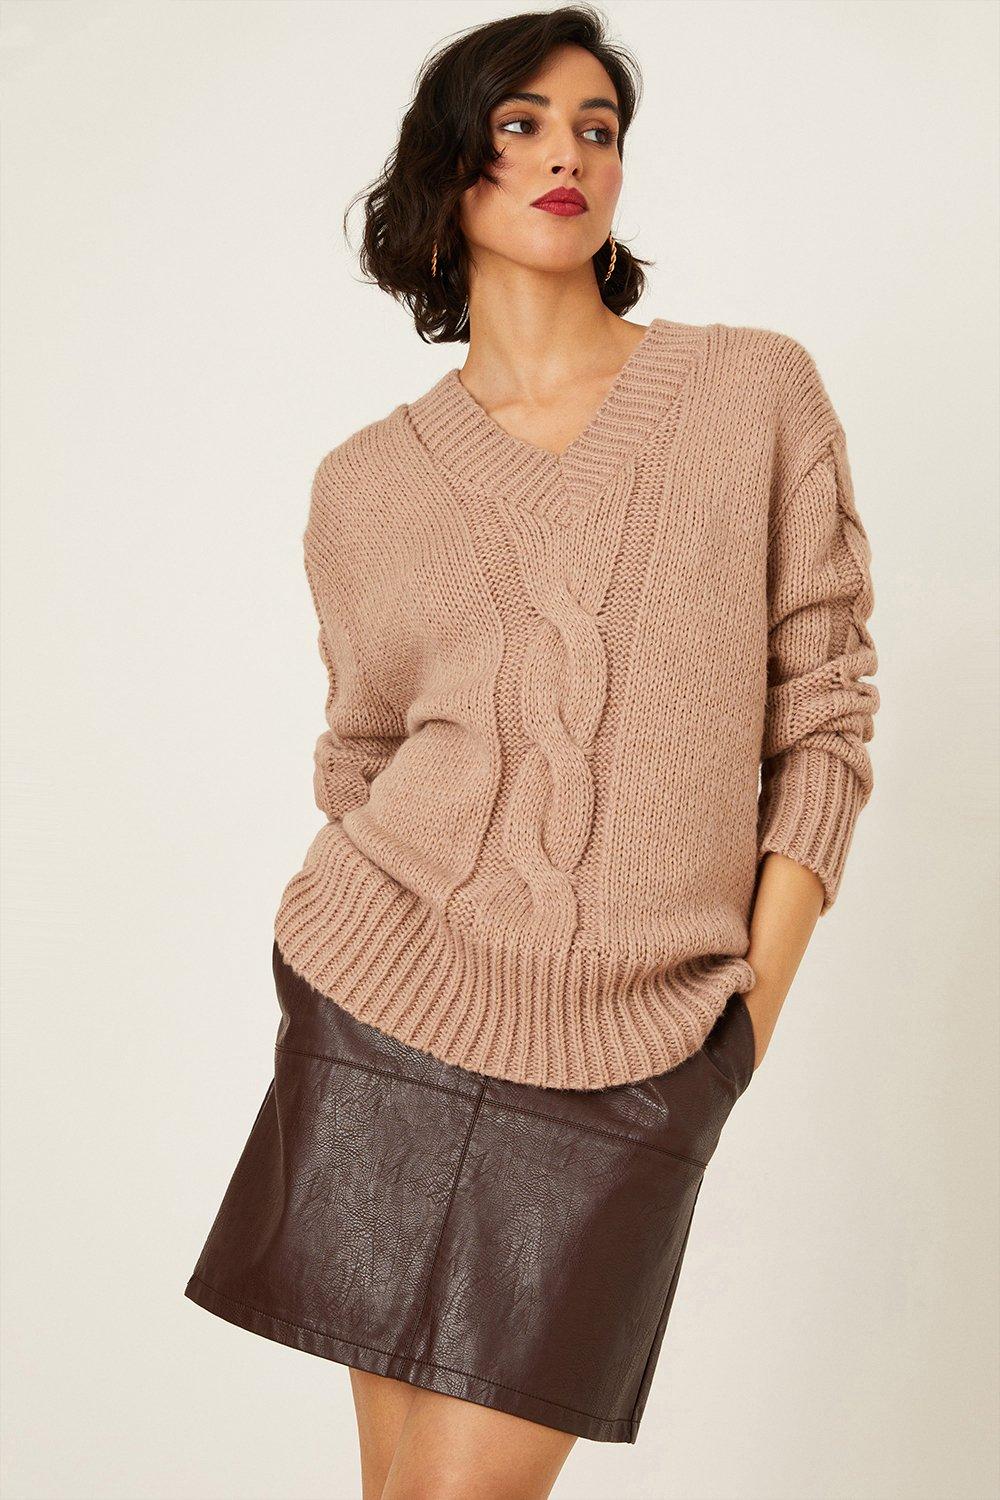 Women’s V Neck Cable Jumper - stone - S